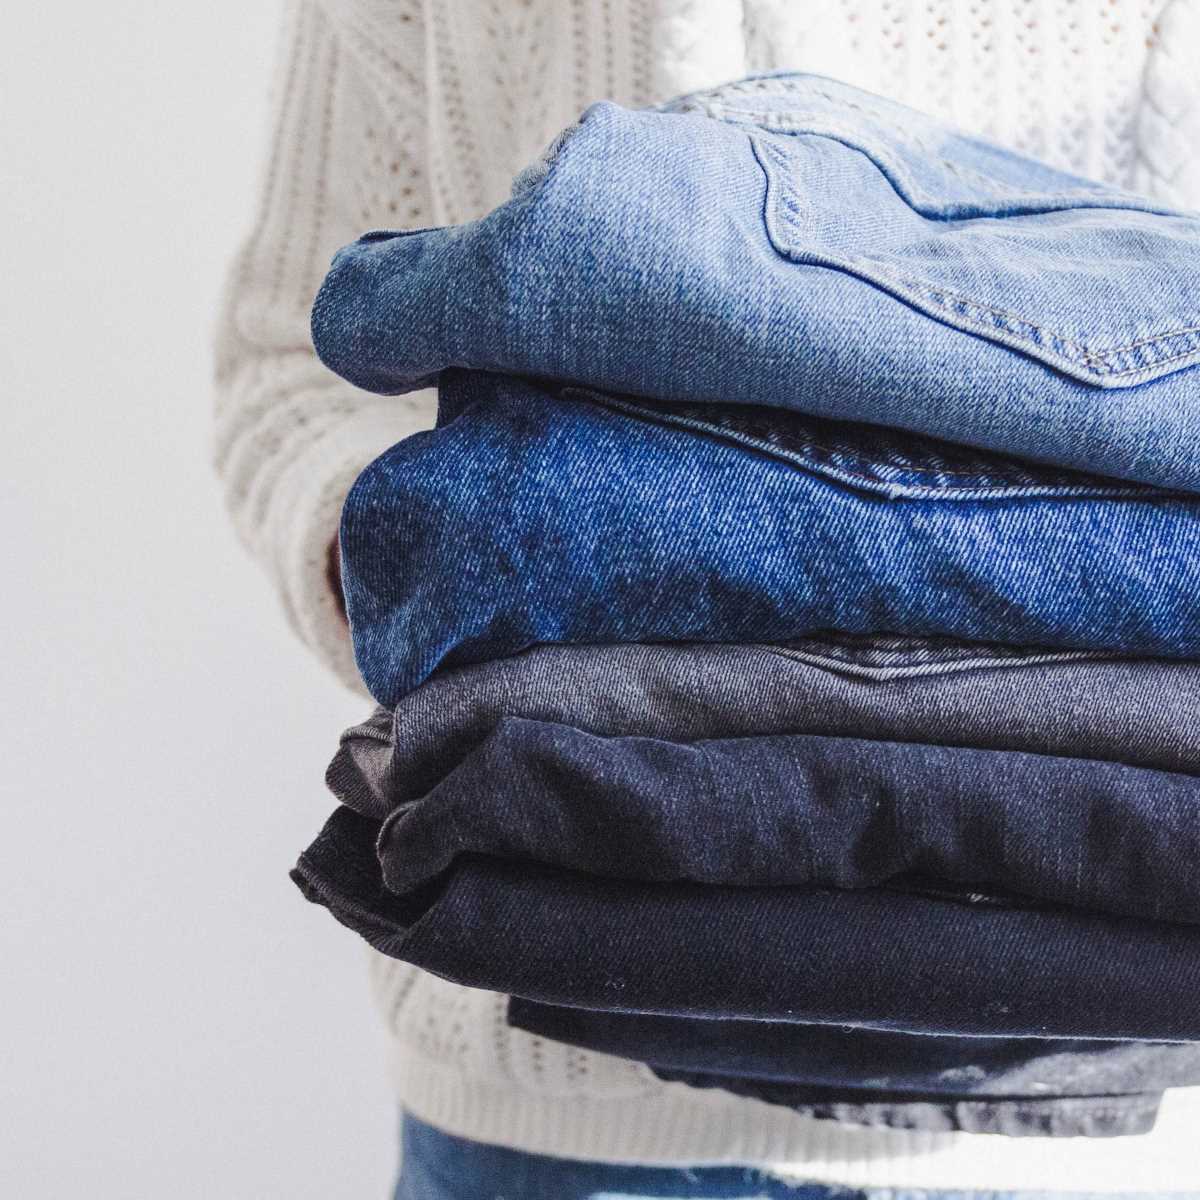 Jeans are polluting our Earth. Environment Social and Governance (ESG)